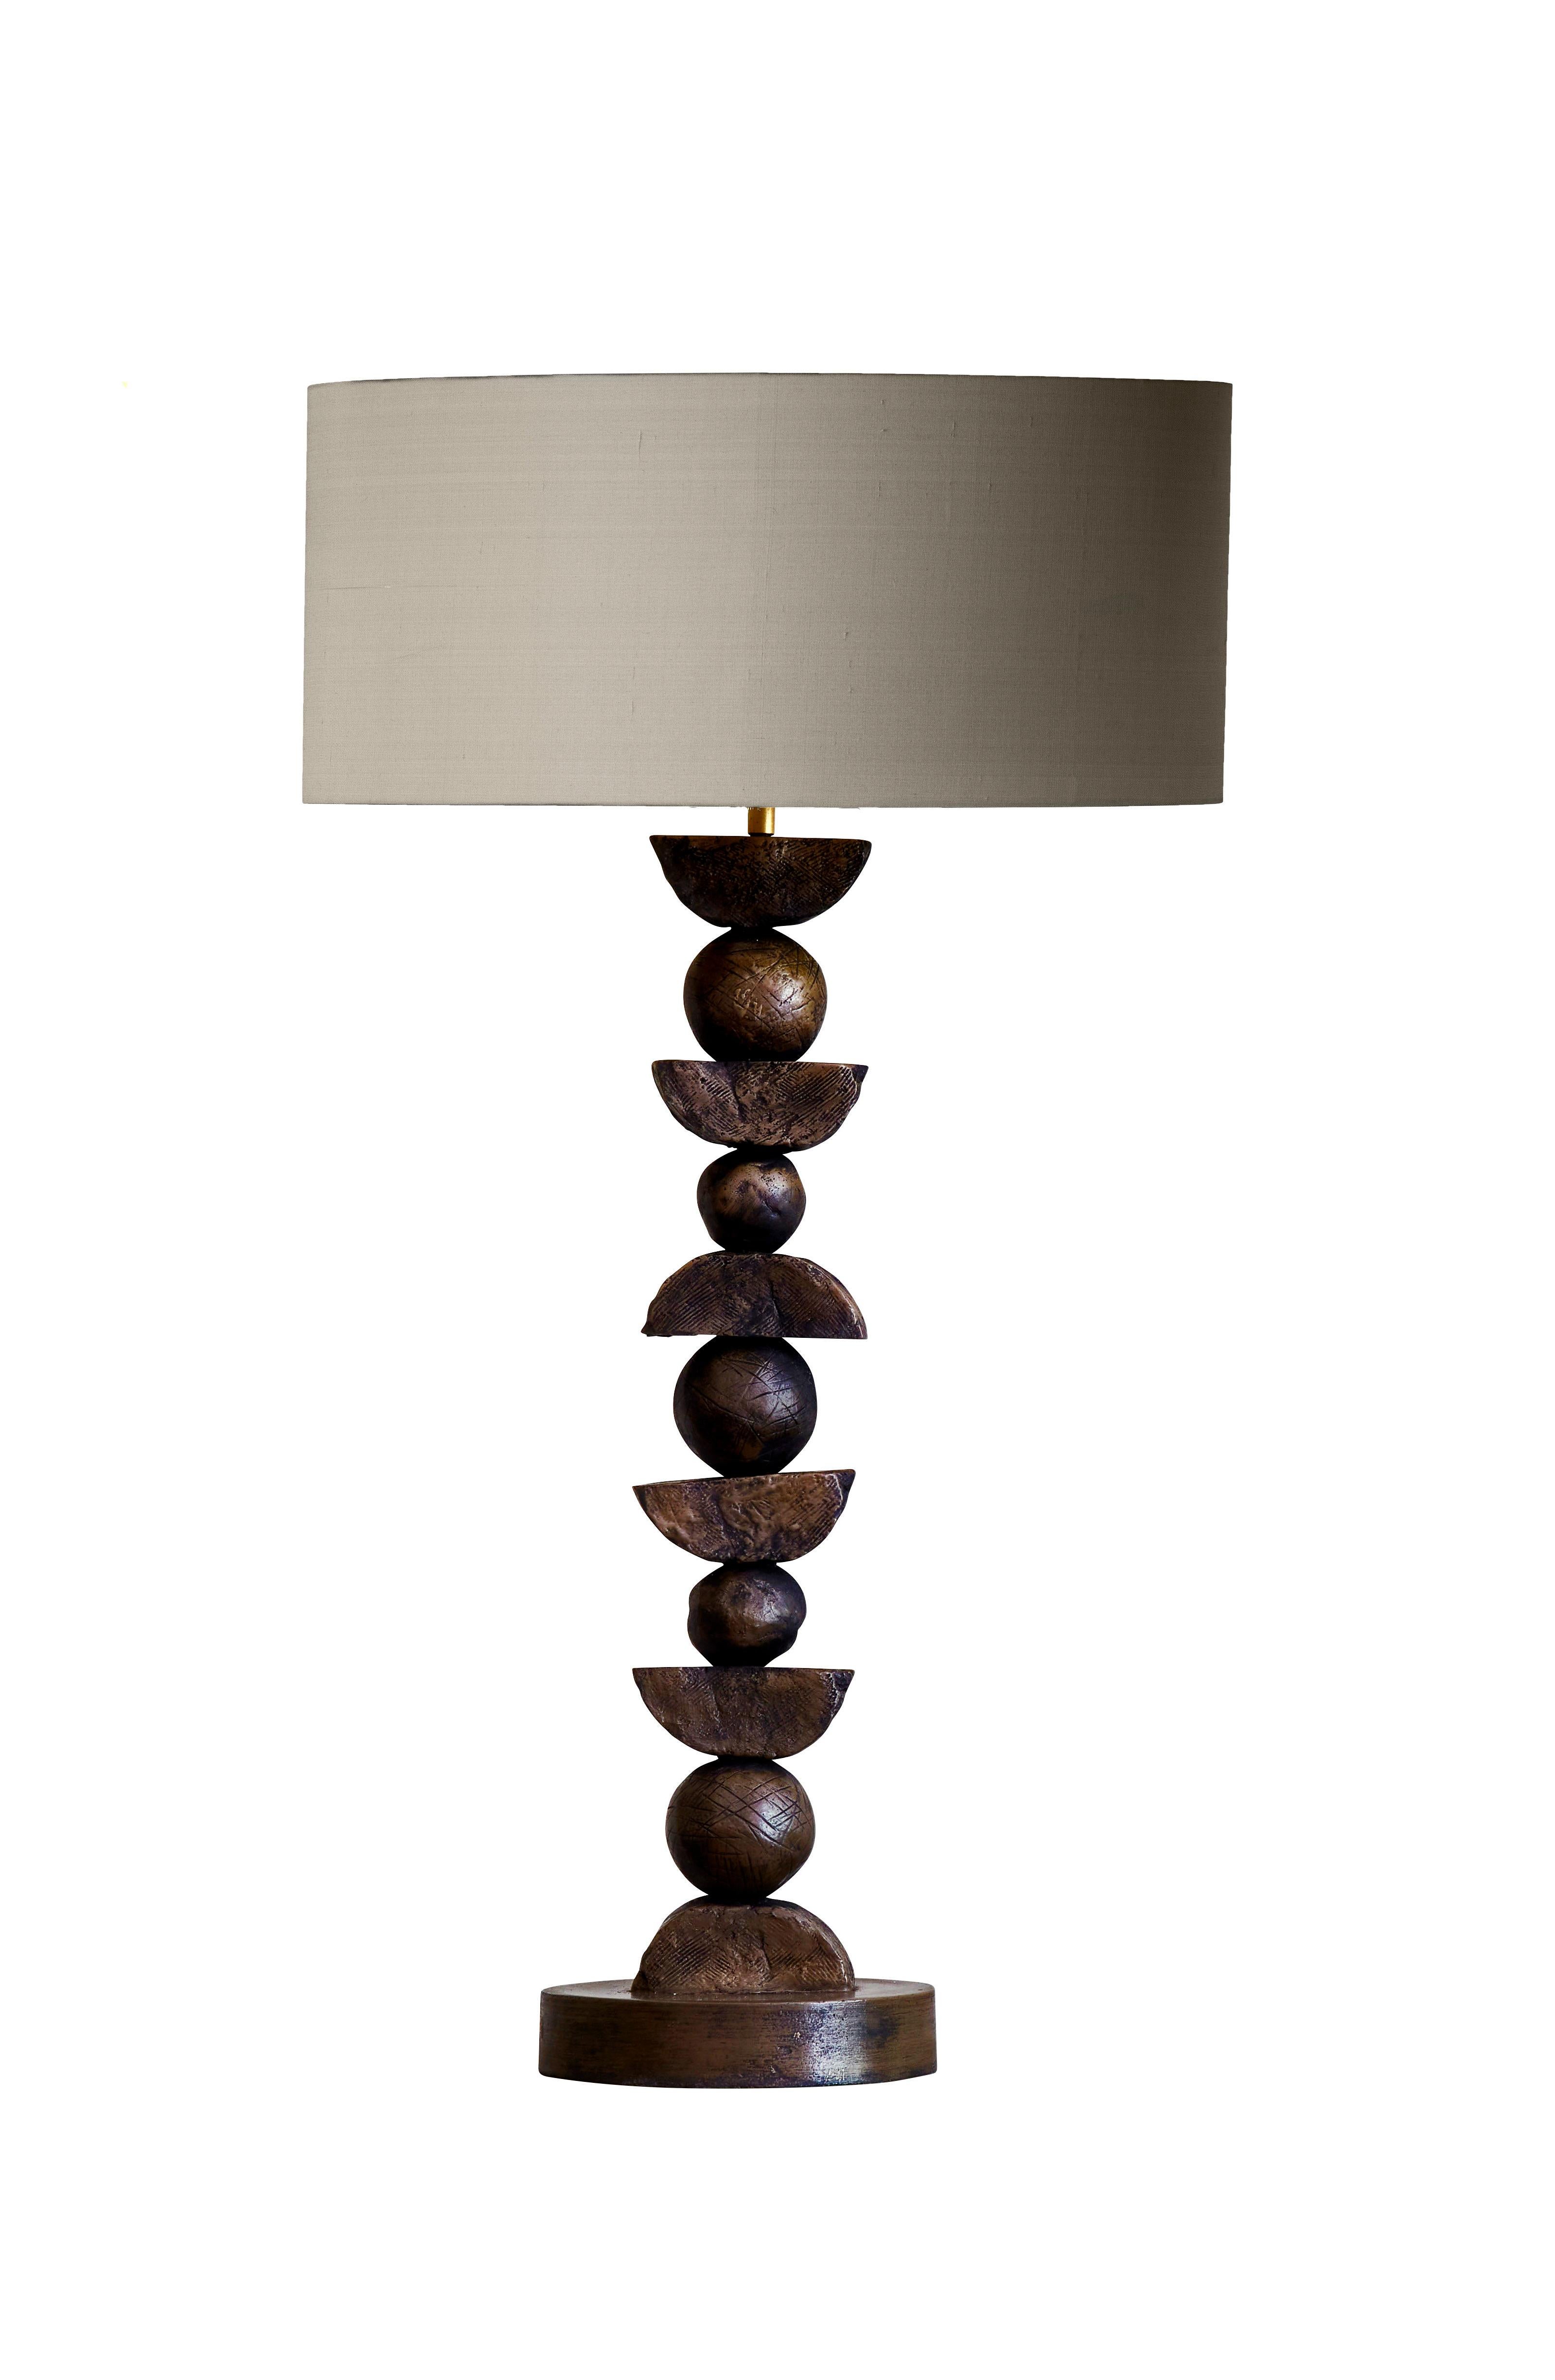 Modern Contemporary European Bronze Silhouette Table Lamp by Margit Wittig For Sale